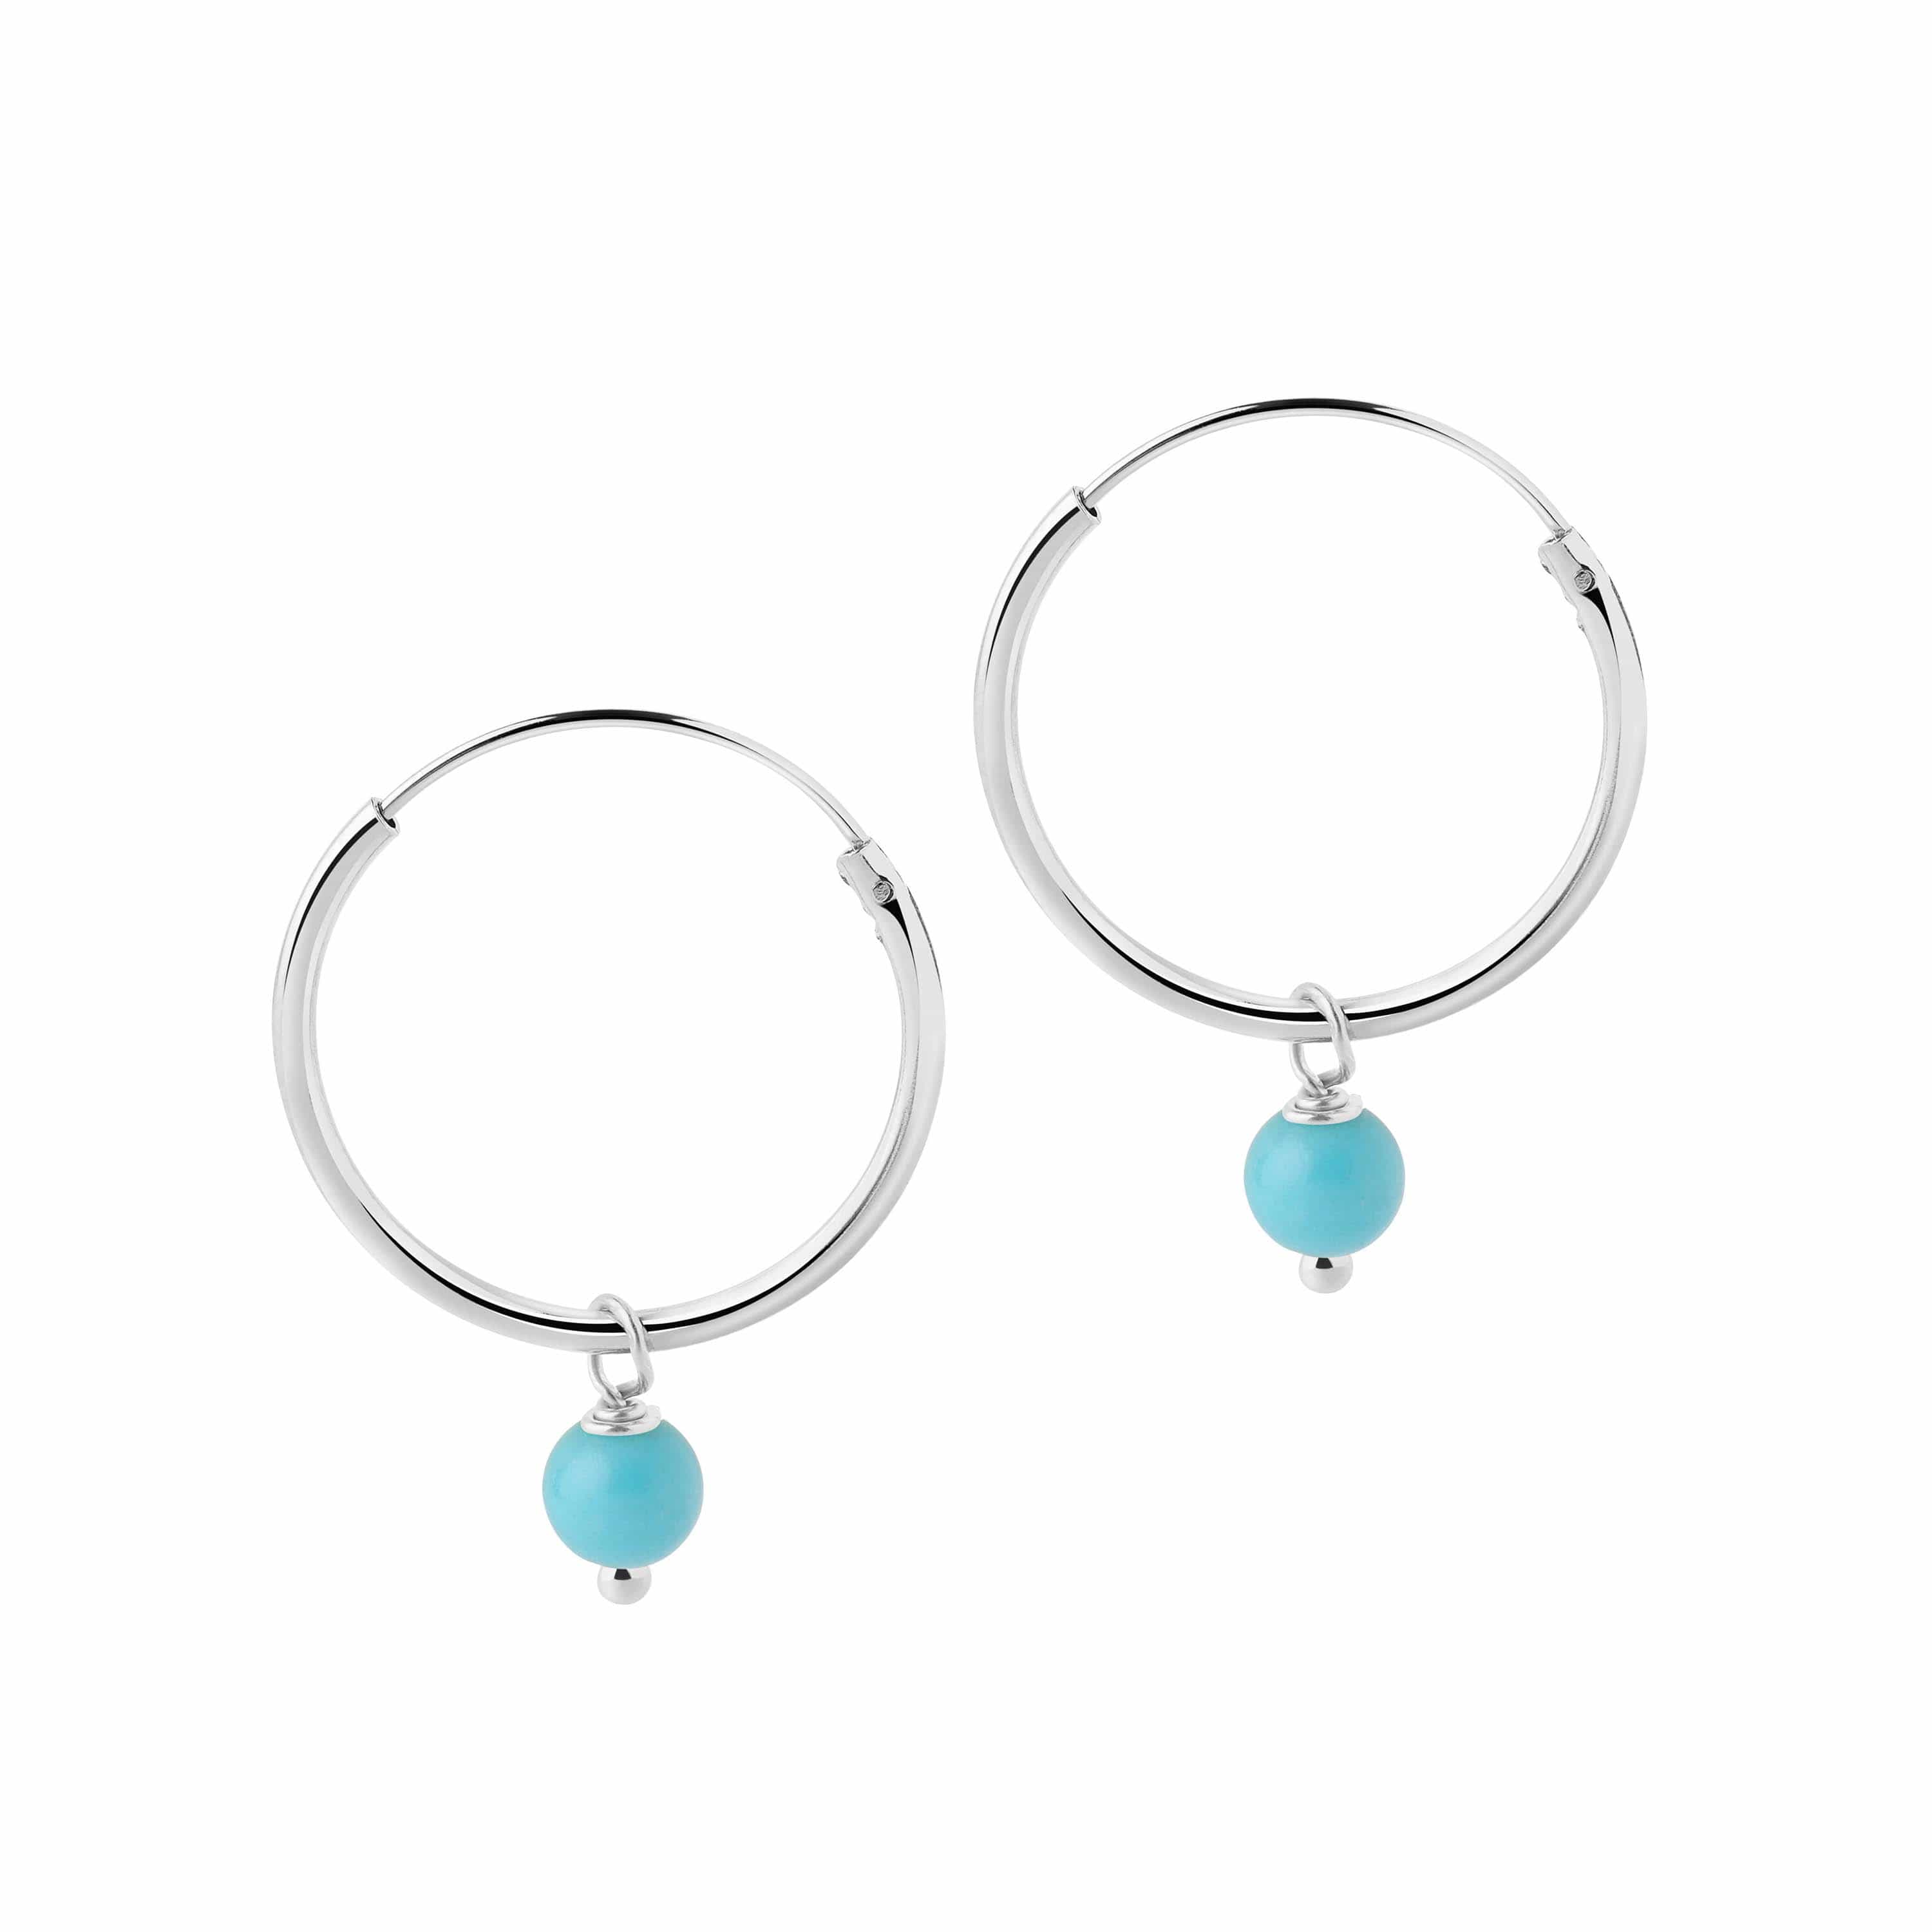 Small Gold Plated Hoop Earrings with Turquoise Blue Stone